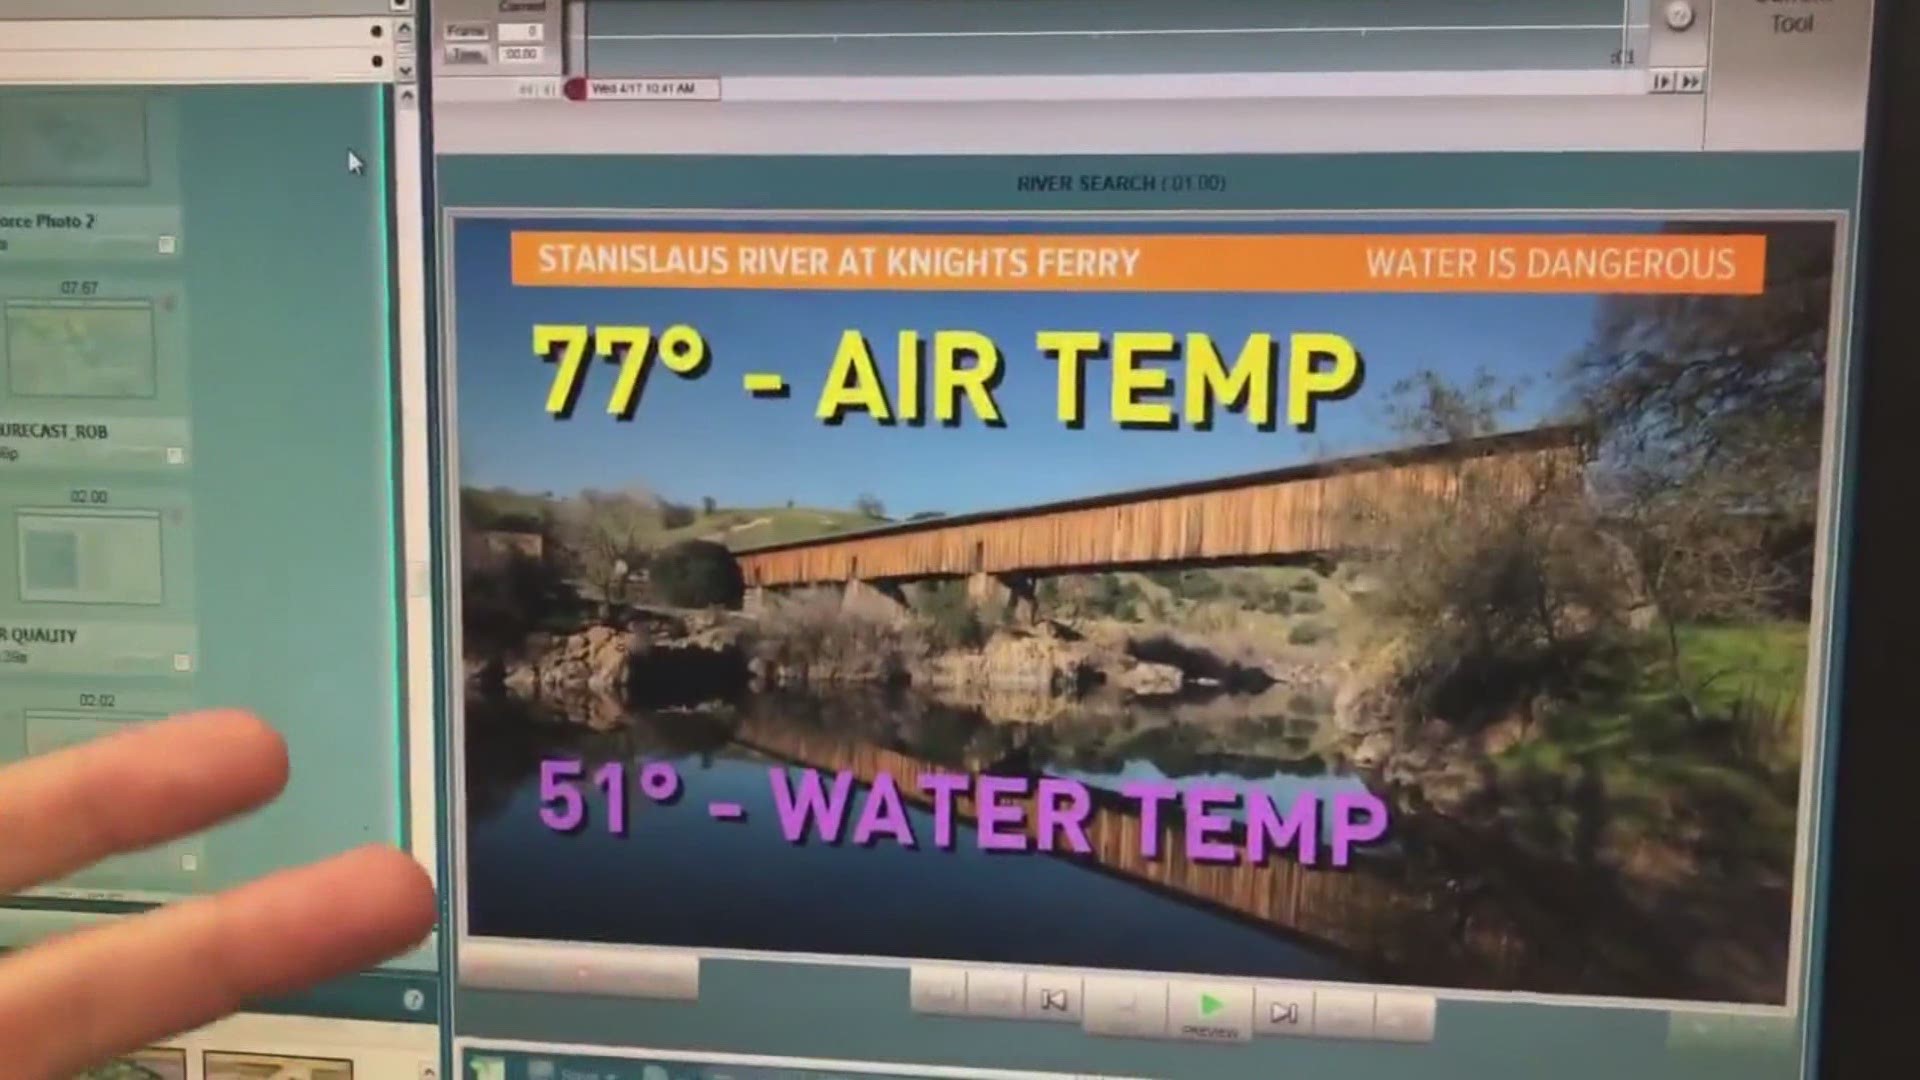 ABC10's Rob Carlmark shared this yearly reminder to NOT jump into cold river or lake water when it gets warmer in early Spring. In a Facebook live shared earlier today, Rob explained that jumping into the cold water could be dangerous and deadly. 
Air temp is not = to water temp.